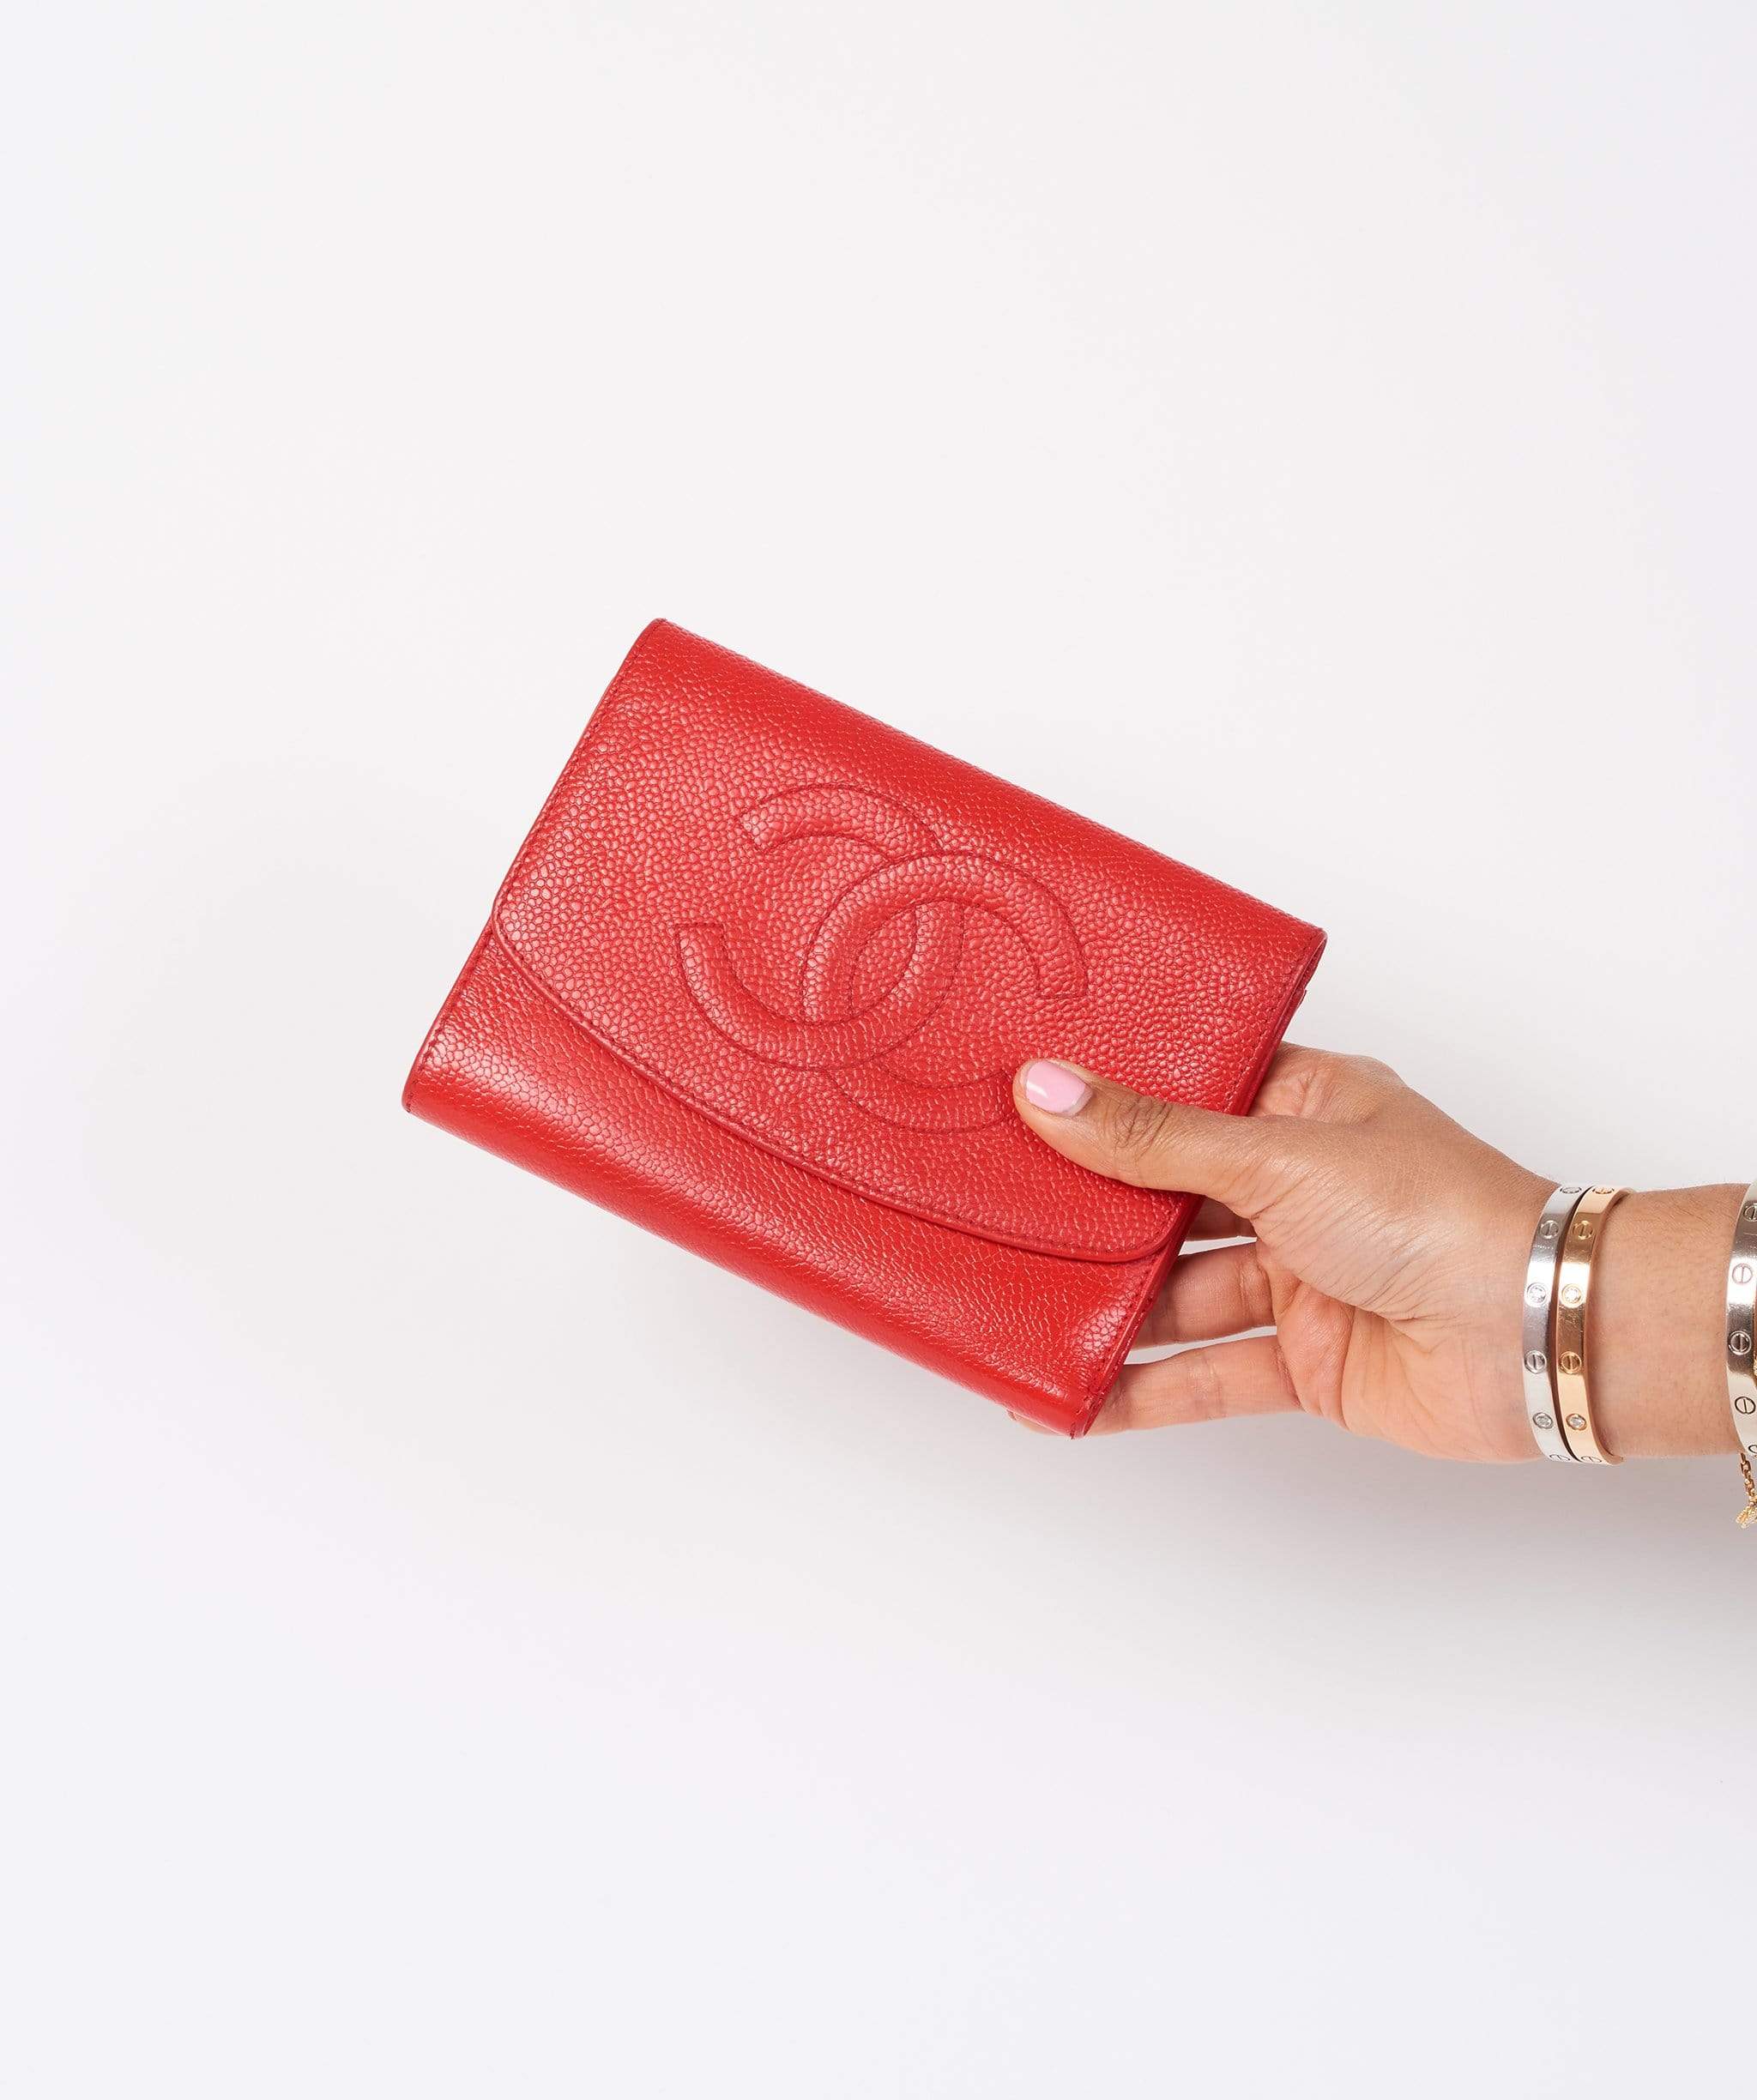 Chanel Chanel Red Classic Wallet